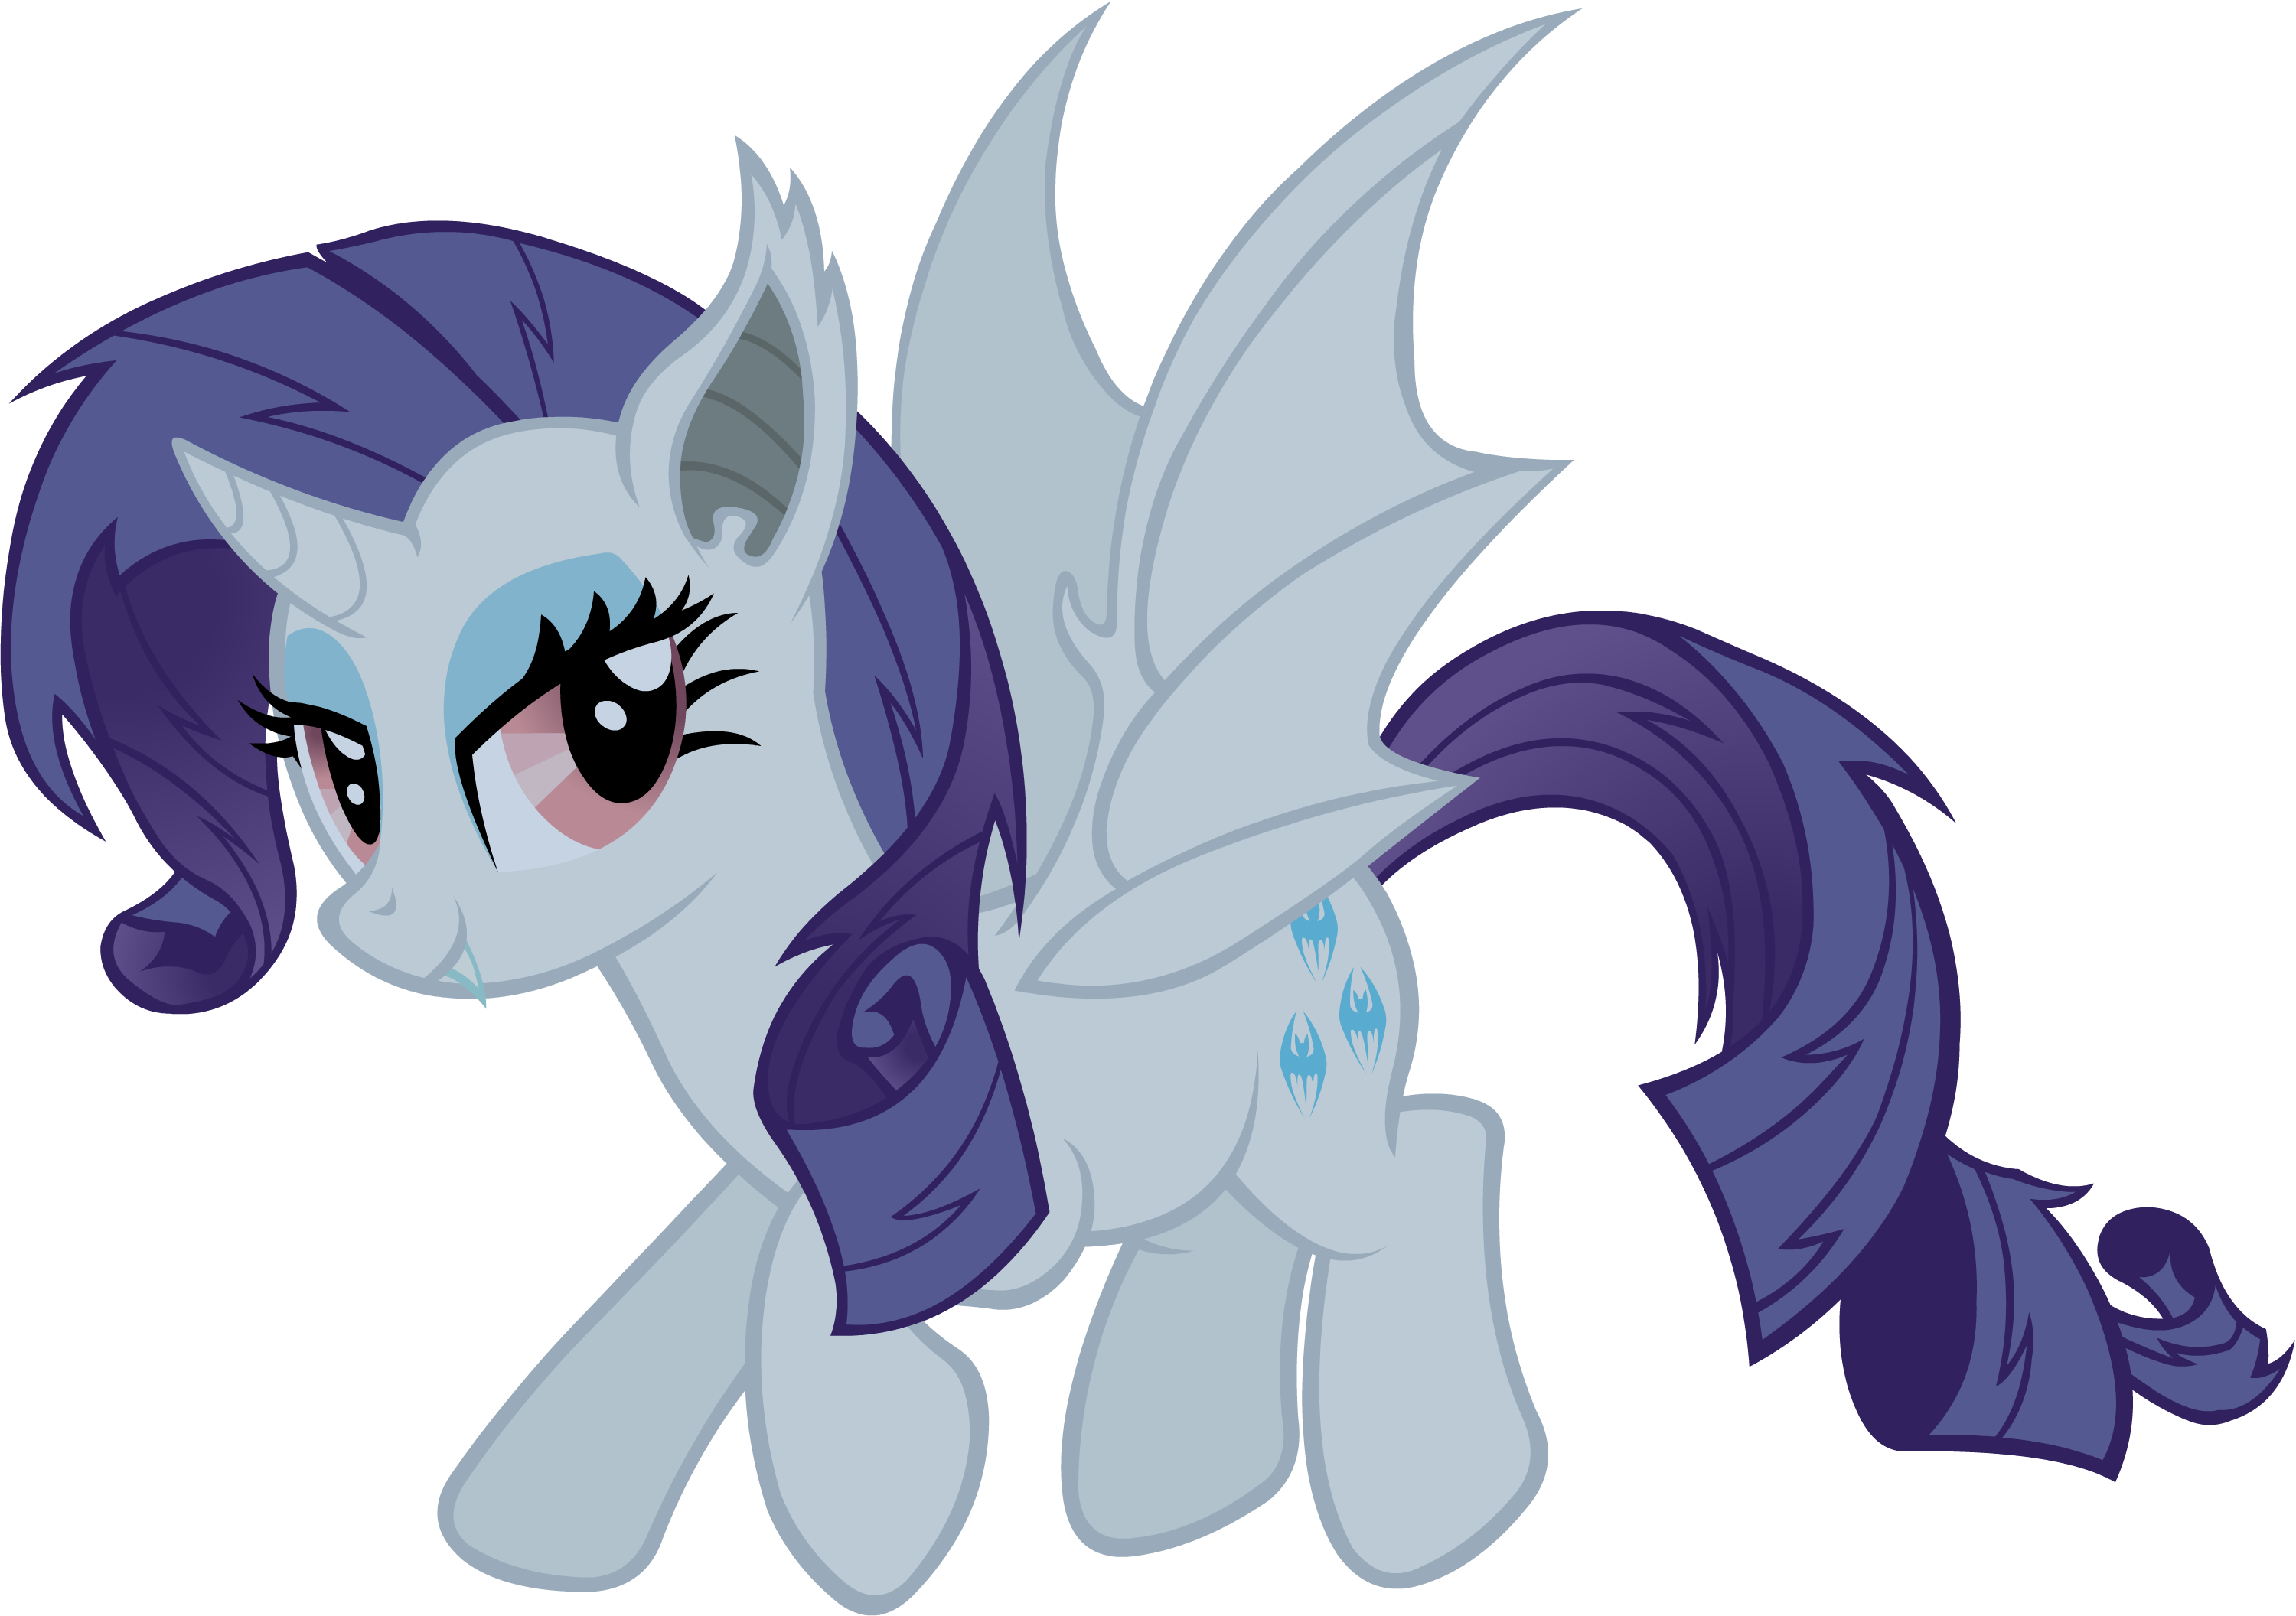 bat_rarity_by_doctor_g-d70loap.png